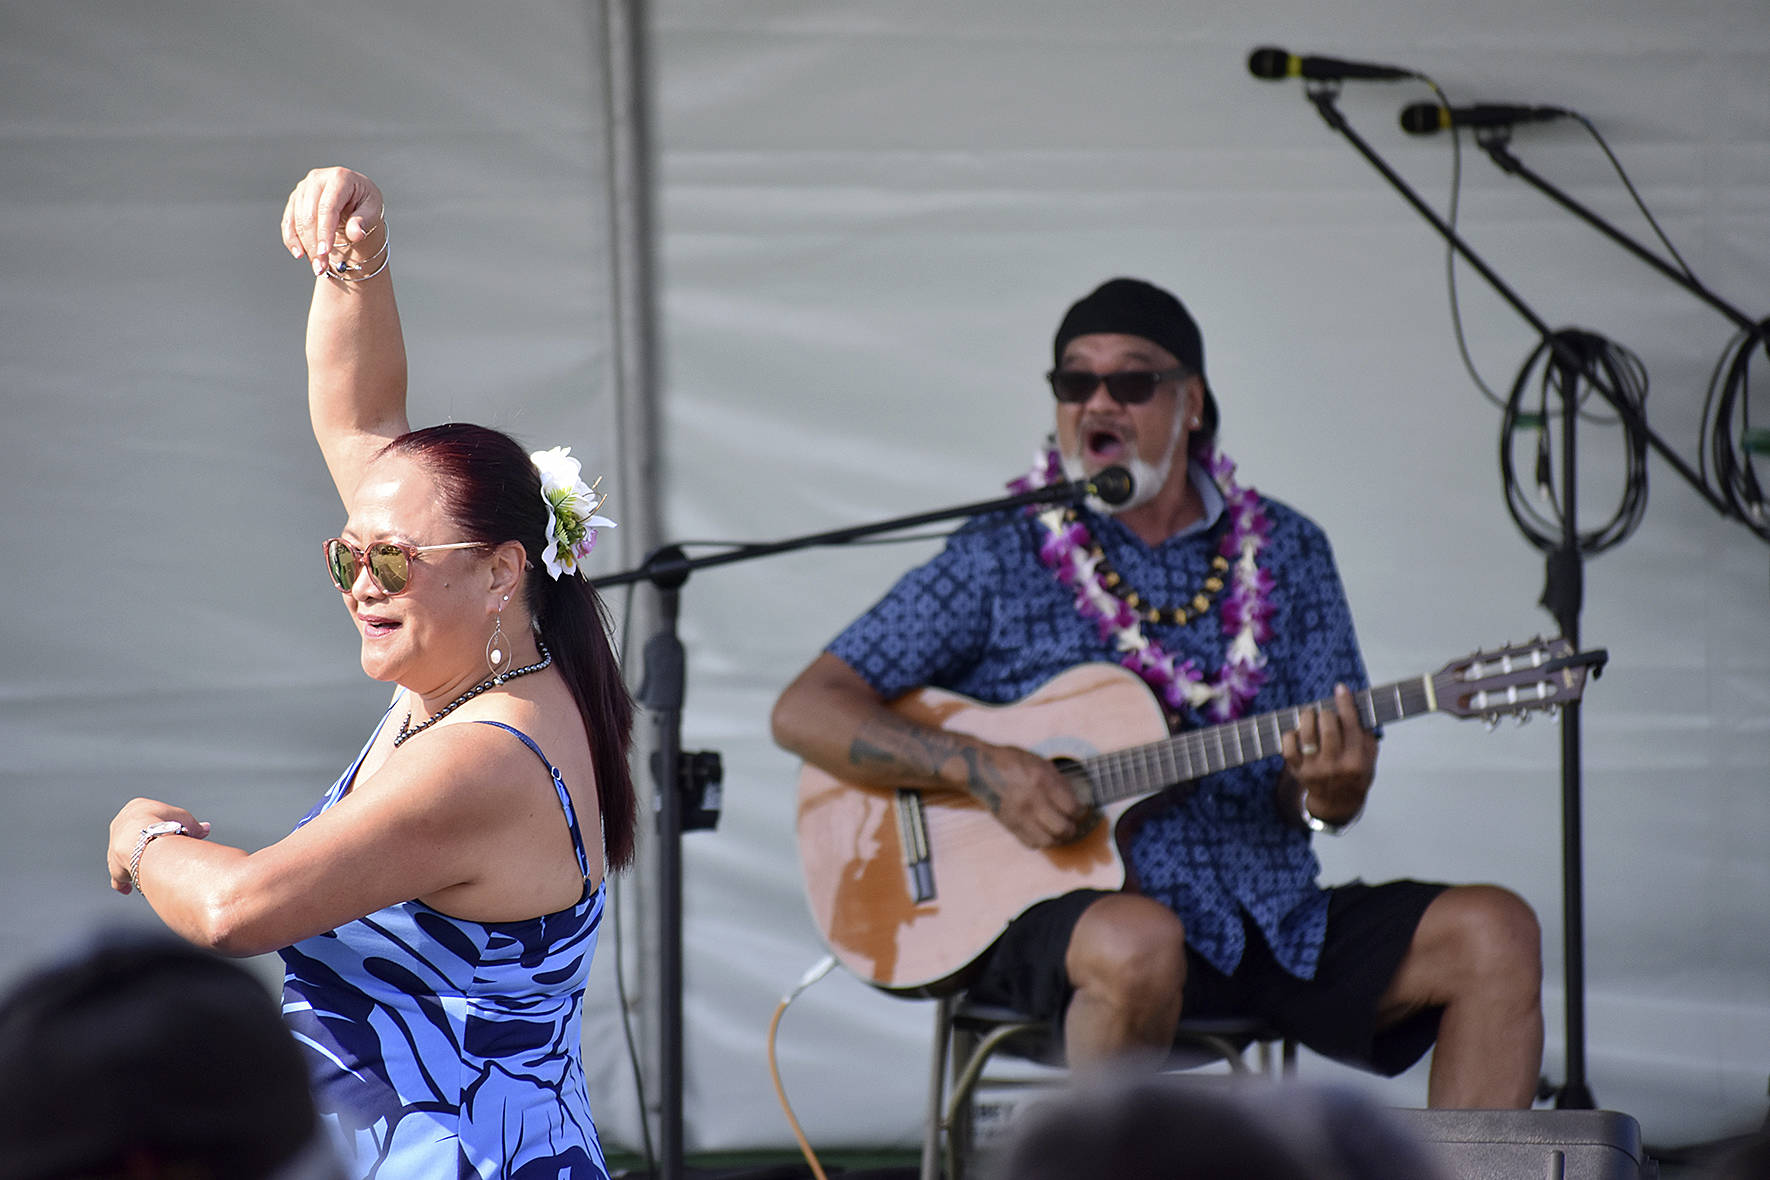 Headliner for Polynesian Festival Bruddah Waltah, who traveled from Hawaii to perform, plays while his wife of 43 years, Thailiana, dances on Saturday Aug. 18.